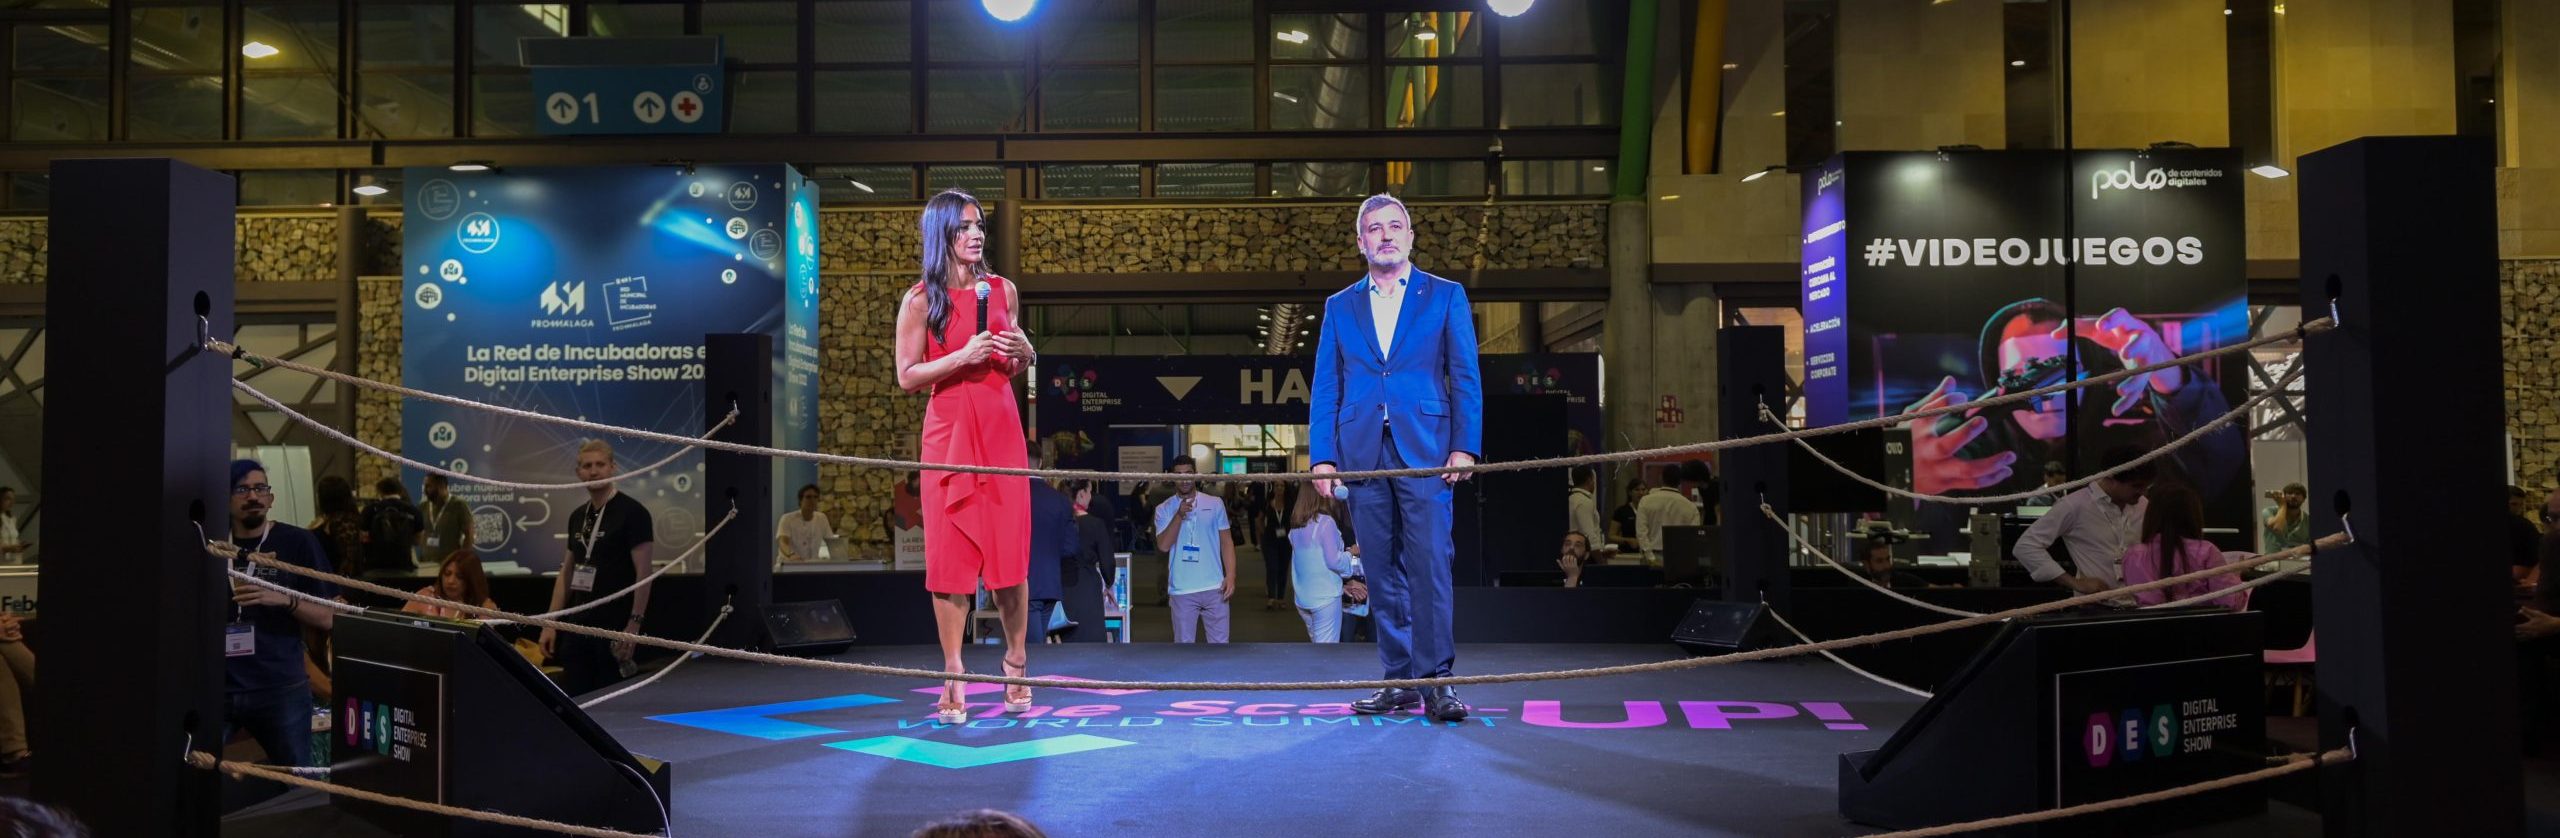 Begoña Villacís and Jaume Collboni step into the ring to 